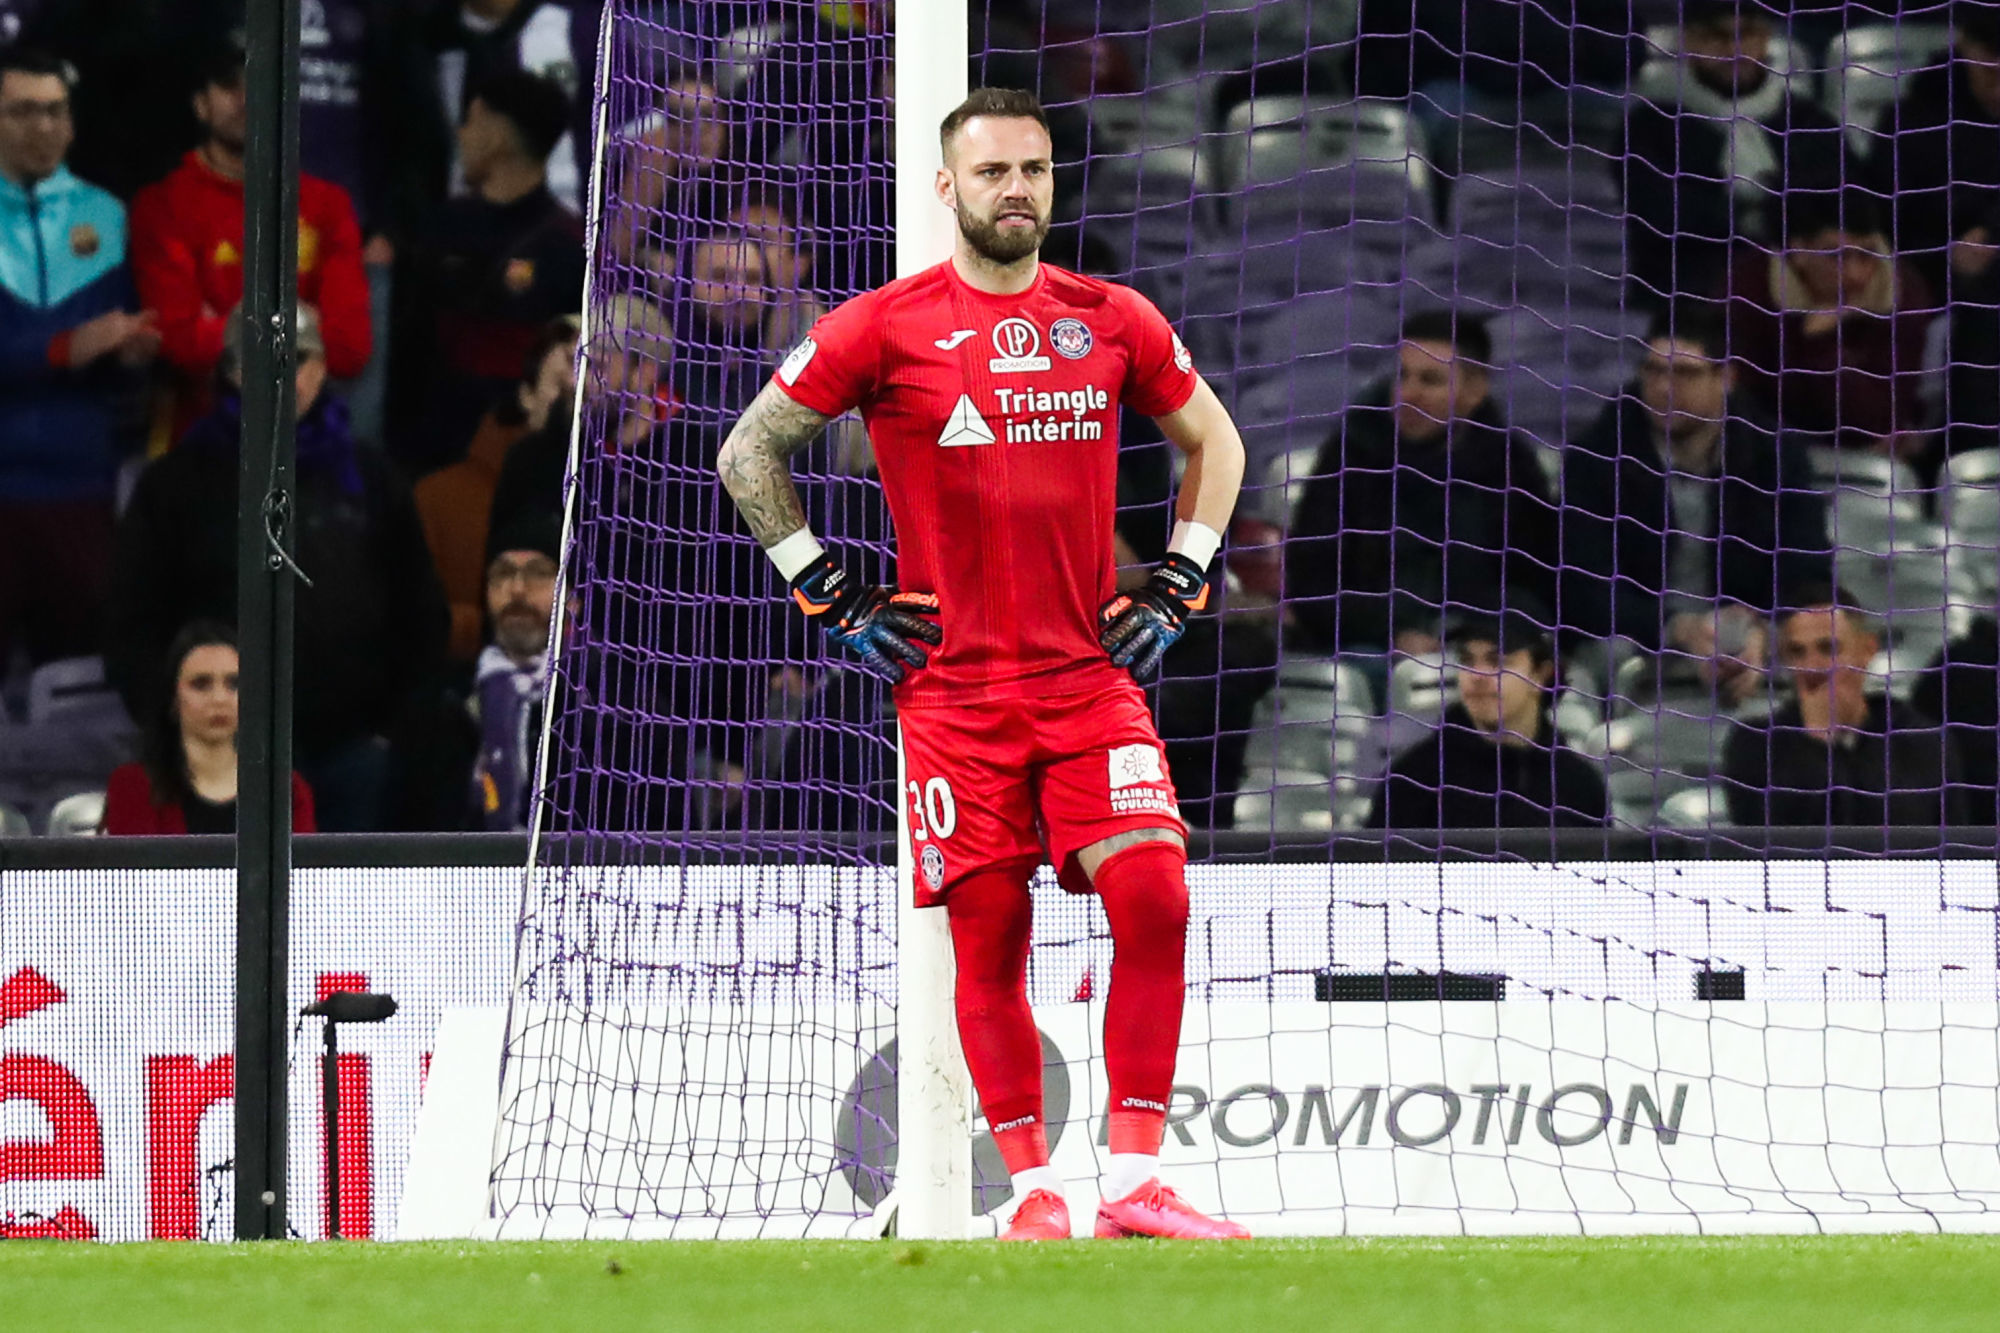 Baptiste REYNET of Toulouse during the Ligue 1 match between Toulouse and Nice at Stadium Municipal on February 15, 2020 in Toulouse, France. (Photo by Manuel Blondeau/Icon Sport) - Baptiste REYNET - Stadium Municipal - Toulouse (France)